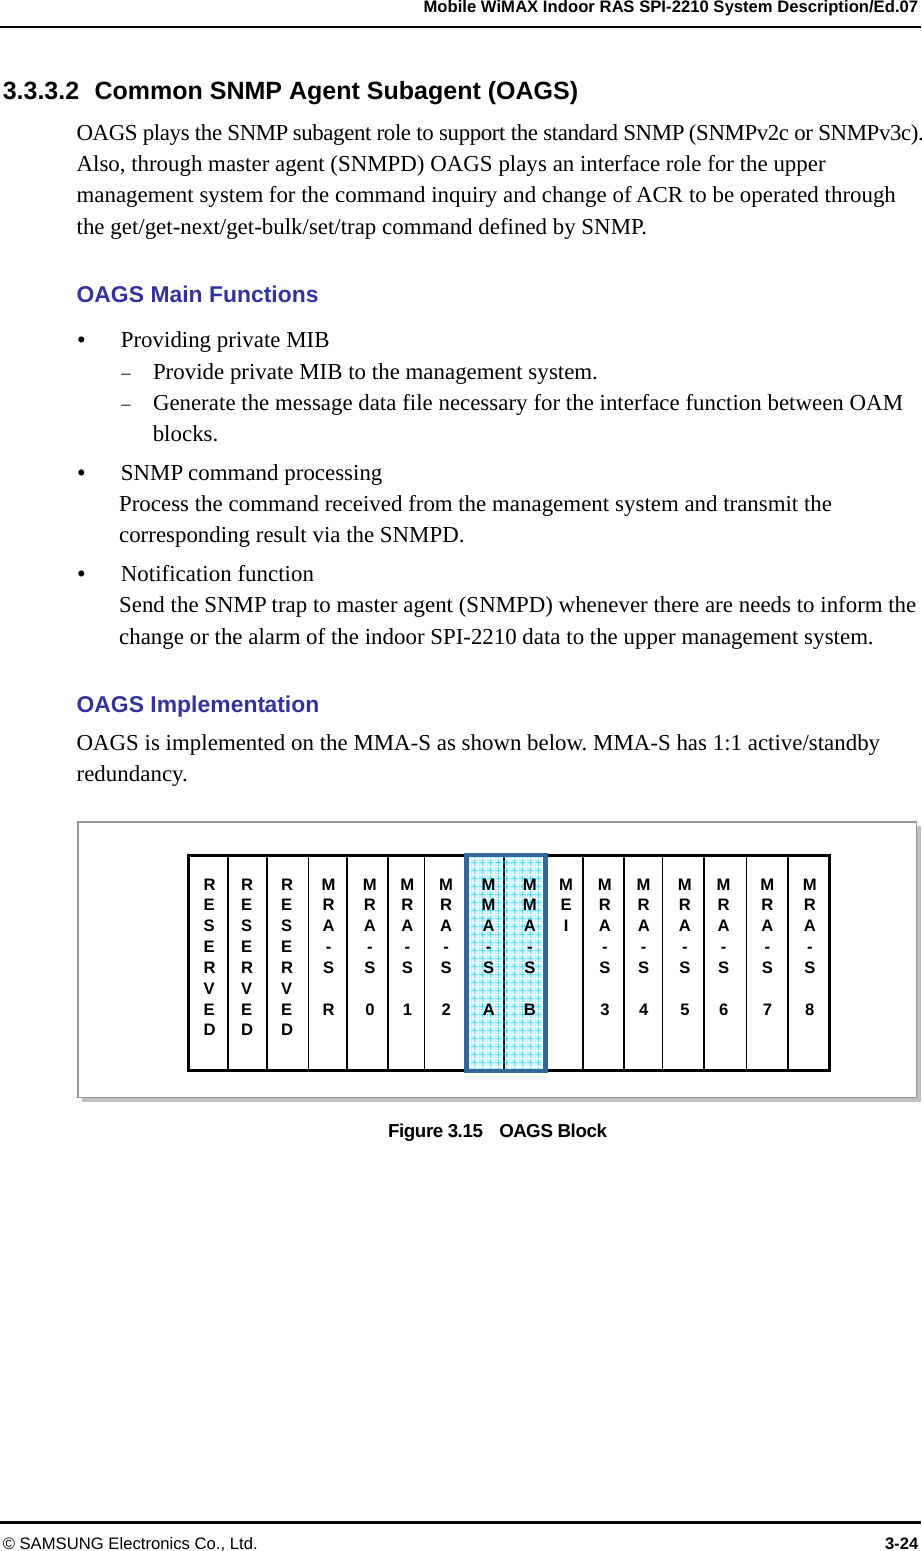   Mobile WiMAX Indoor RAS SPI-2210 System Description/Ed.07 © SAMSUNG Electronics Co., Ltd.  3-24 3.3.3.2  Common SNMP Agent Subagent (OAGS) OAGS plays the SNMP subagent role to support the standard SNMP (SNMPv2c or SNMPv3c). Also, through master agent (SNMPD) OAGS plays an interface role for the upper management system for the command inquiry and change of ACR to be operated through the get/get-next/get-bulk/set/trap command defined by SNMP.  OAGS Main Functions y Providing private MIB − Provide private MIB to the management system. − Generate the message data file necessary for the interface function between OAM blocks. y SNMP command processing Process the command received from the management system and transmit the corresponding result via the SNMPD. y Notification function Send the SNMP trap to master agent (SNMPD) whenever there are needs to inform the change or the alarm of the indoor SPI-2210 data to the upper management system.  OAGS Implementation OAGS is implemented on the MMA-S as shown below. MMA-S has 1:1 active/standby redundancy.  Figure 3.15    OAGS Block RESERVED RESERVED RESERVED MRA- S  R MRA- S 0MRA- S 1MRA- S 2MMA- S AMMA- S BMRA- S 3MRA- S 4MEI MRA- S 5MRA- S 6MRA- S  7 MRA- S  8  